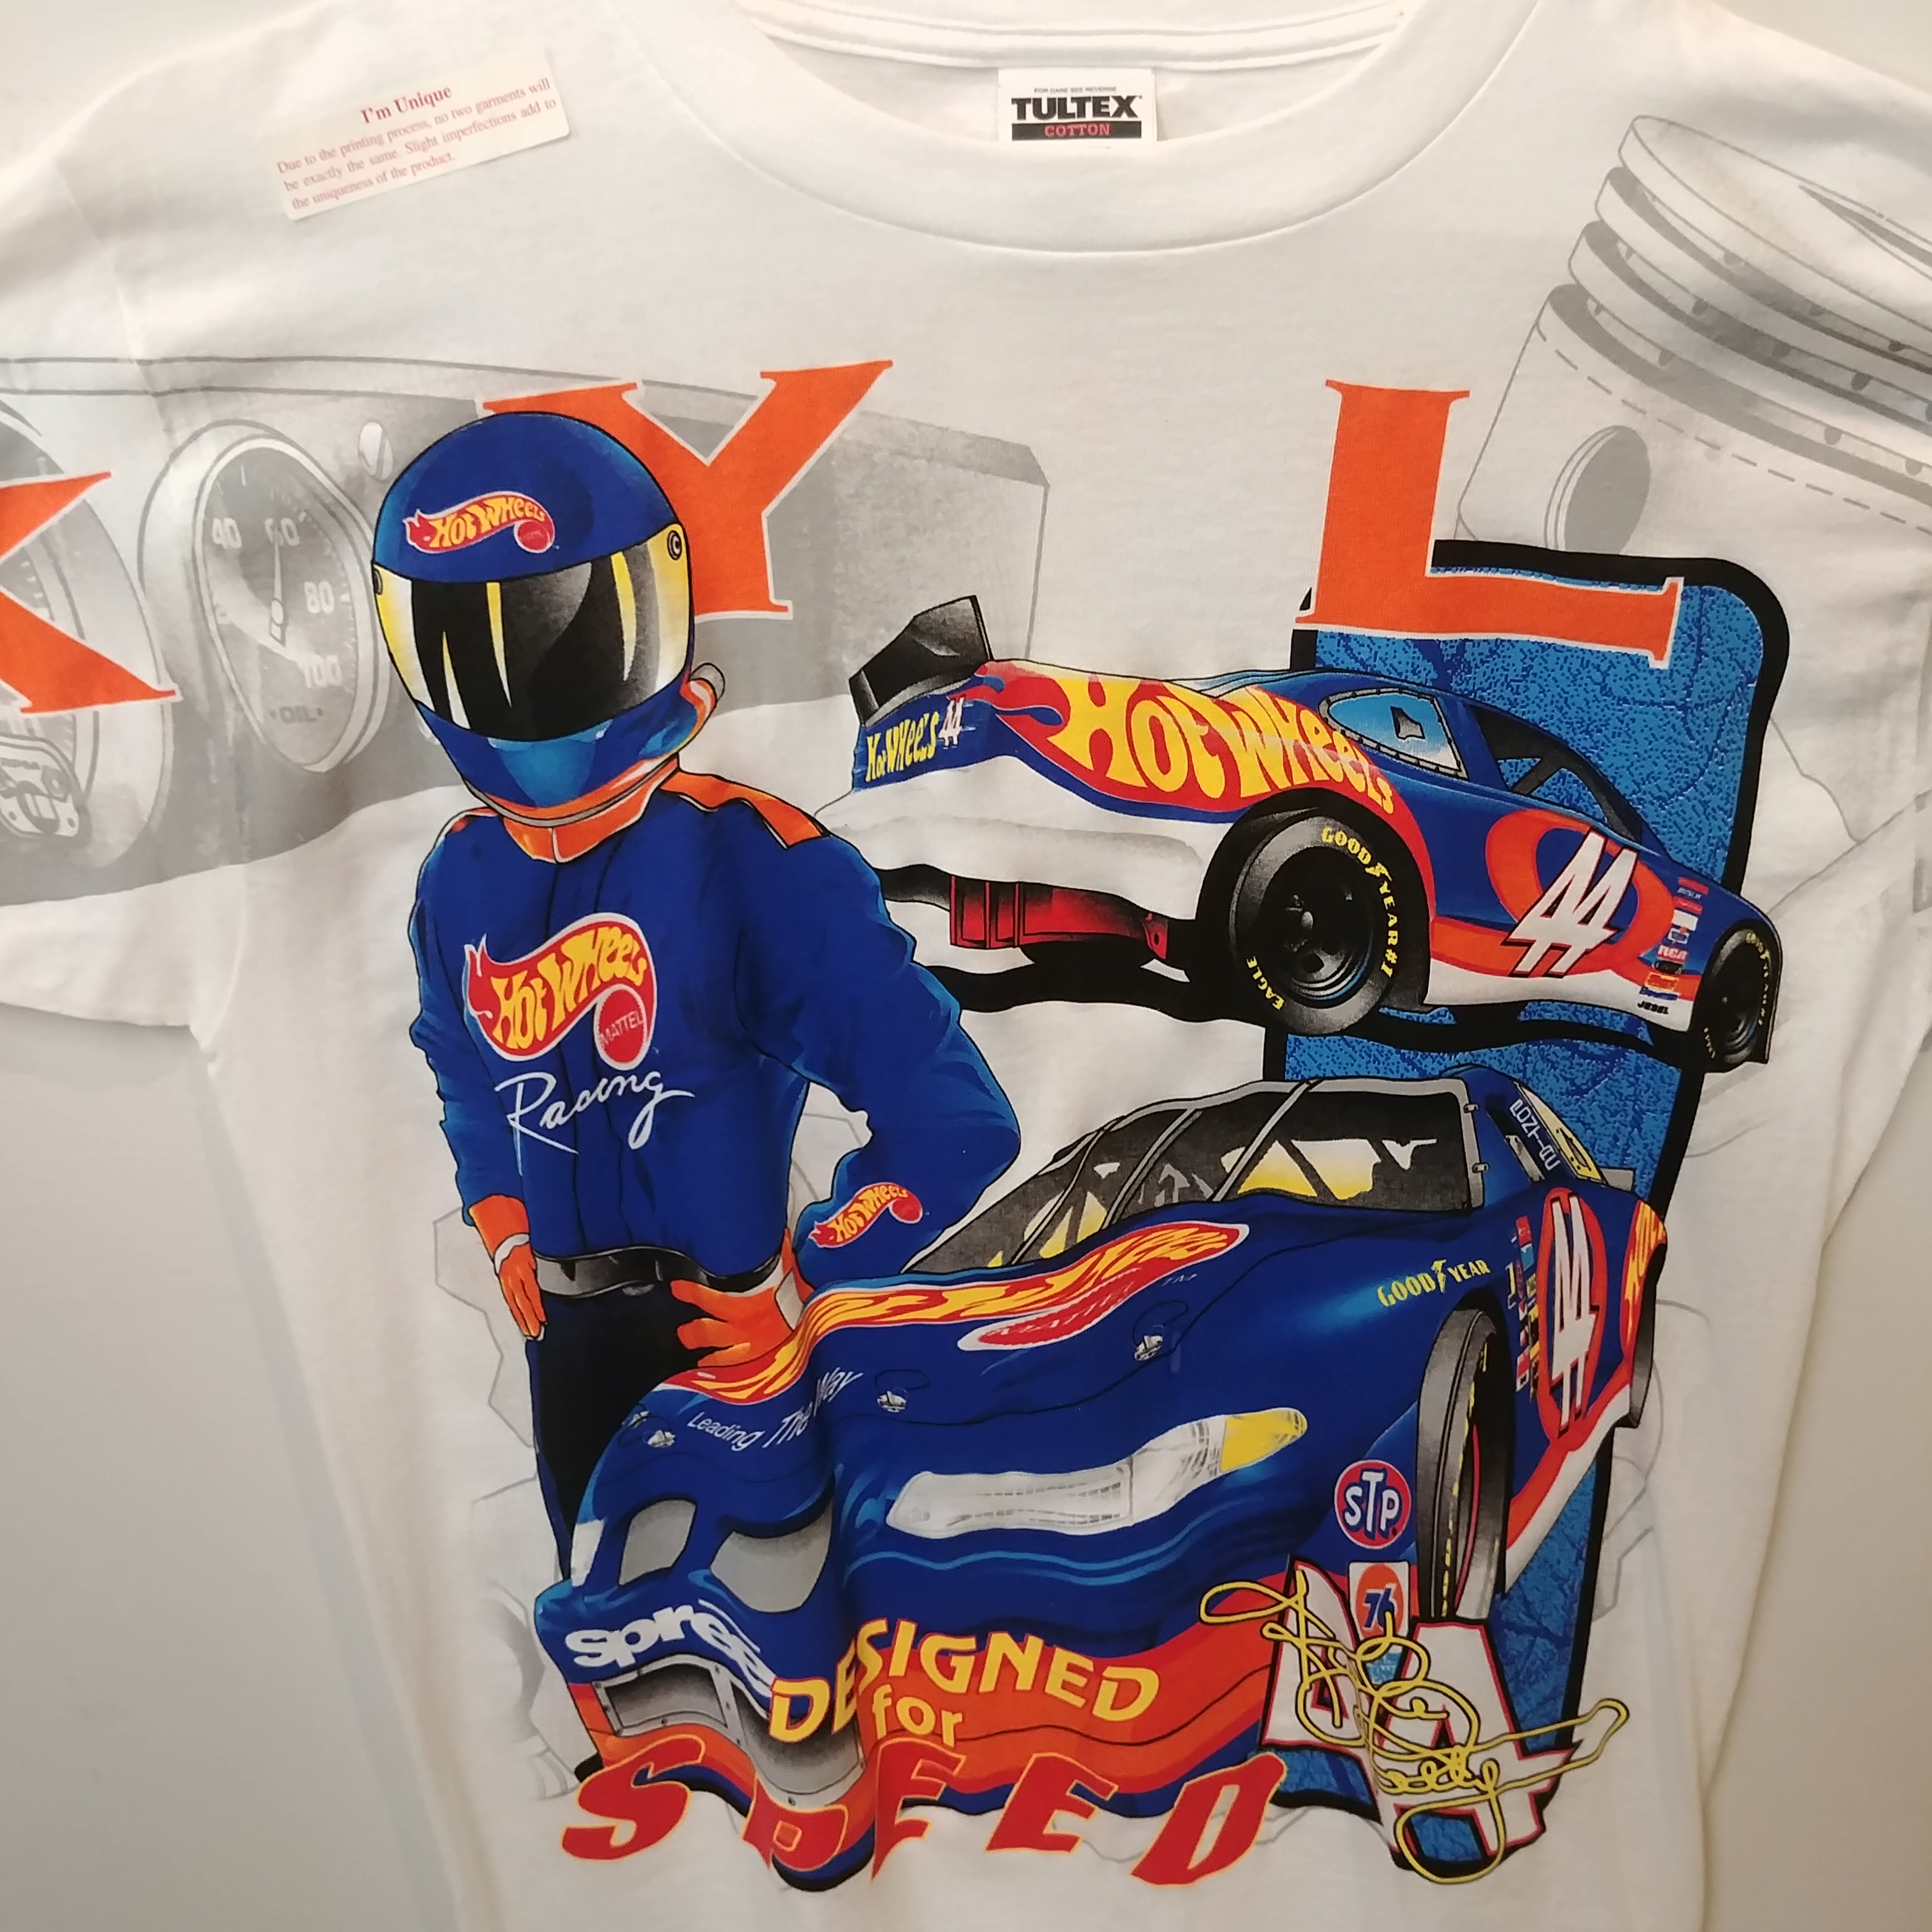 1997 Kyle Petty Hot Wheels "Design For Speed" Total Print tee